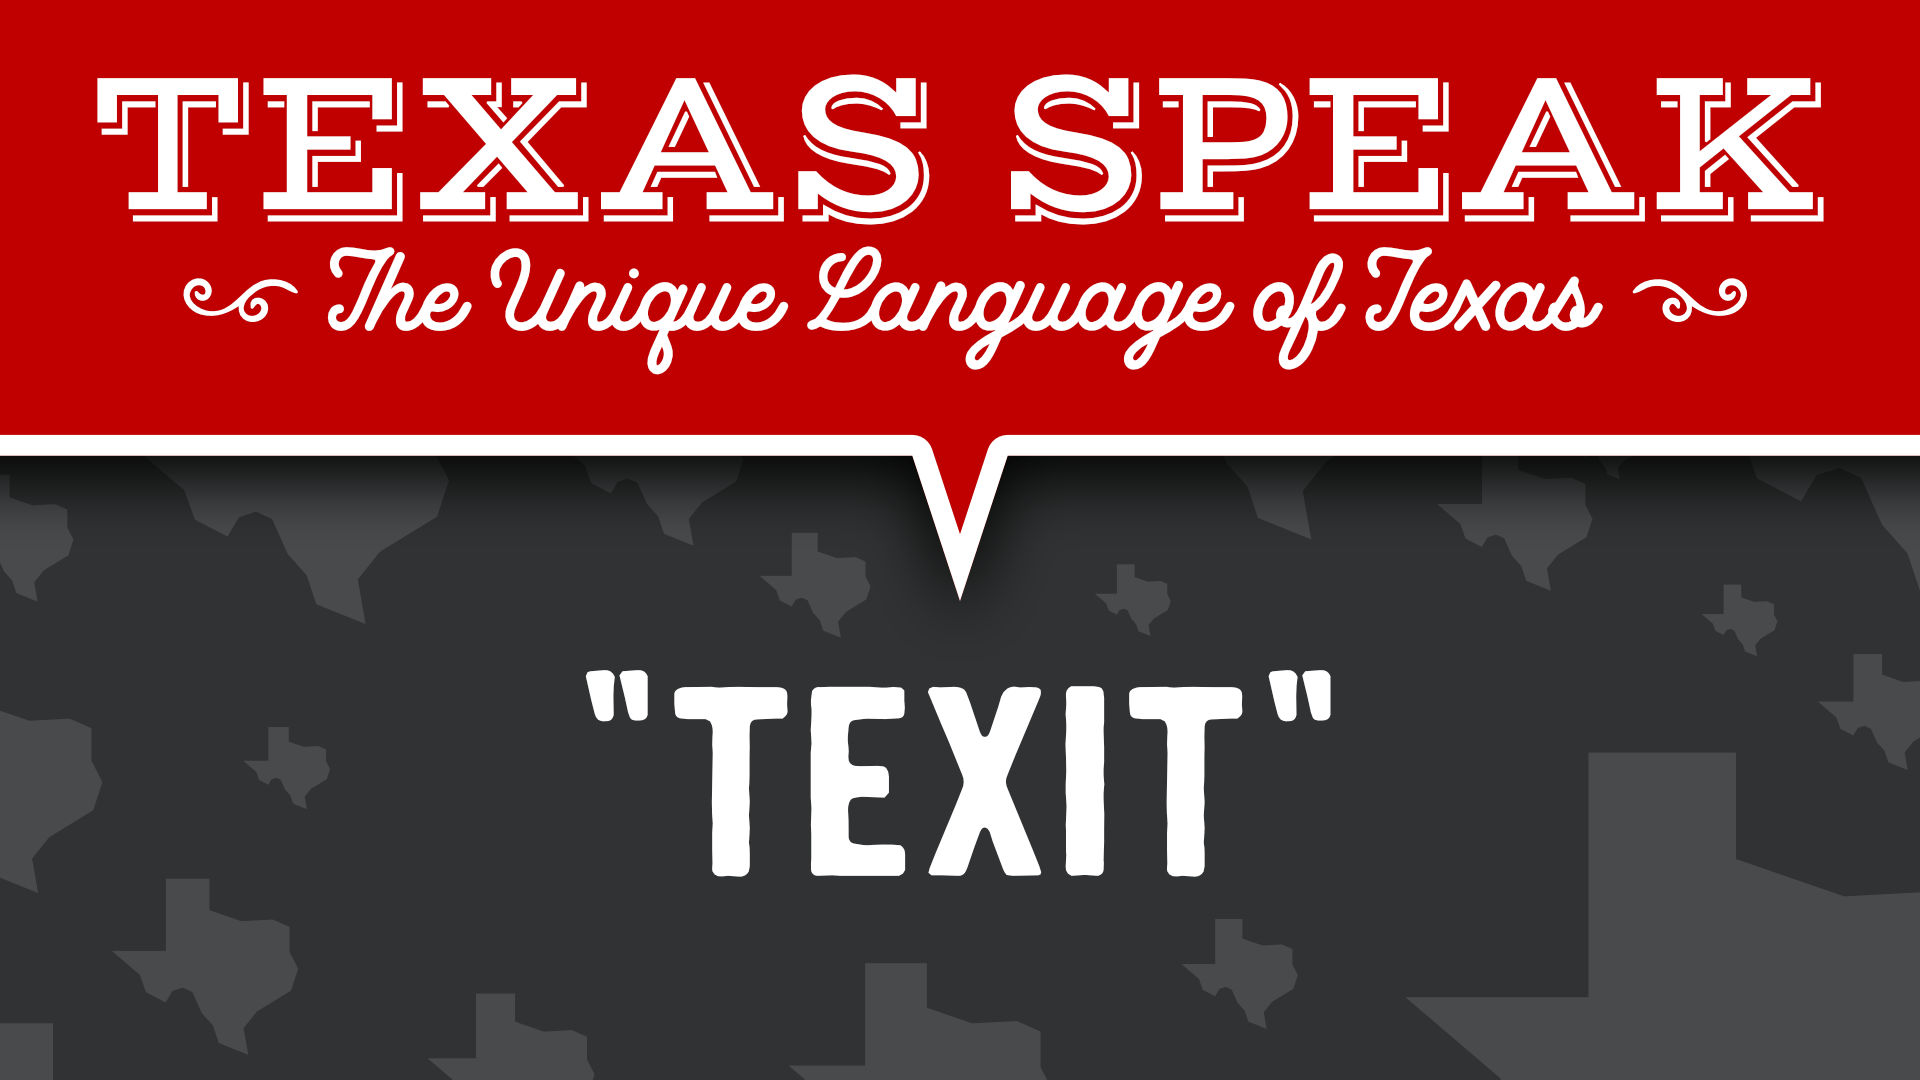 What is Texit?